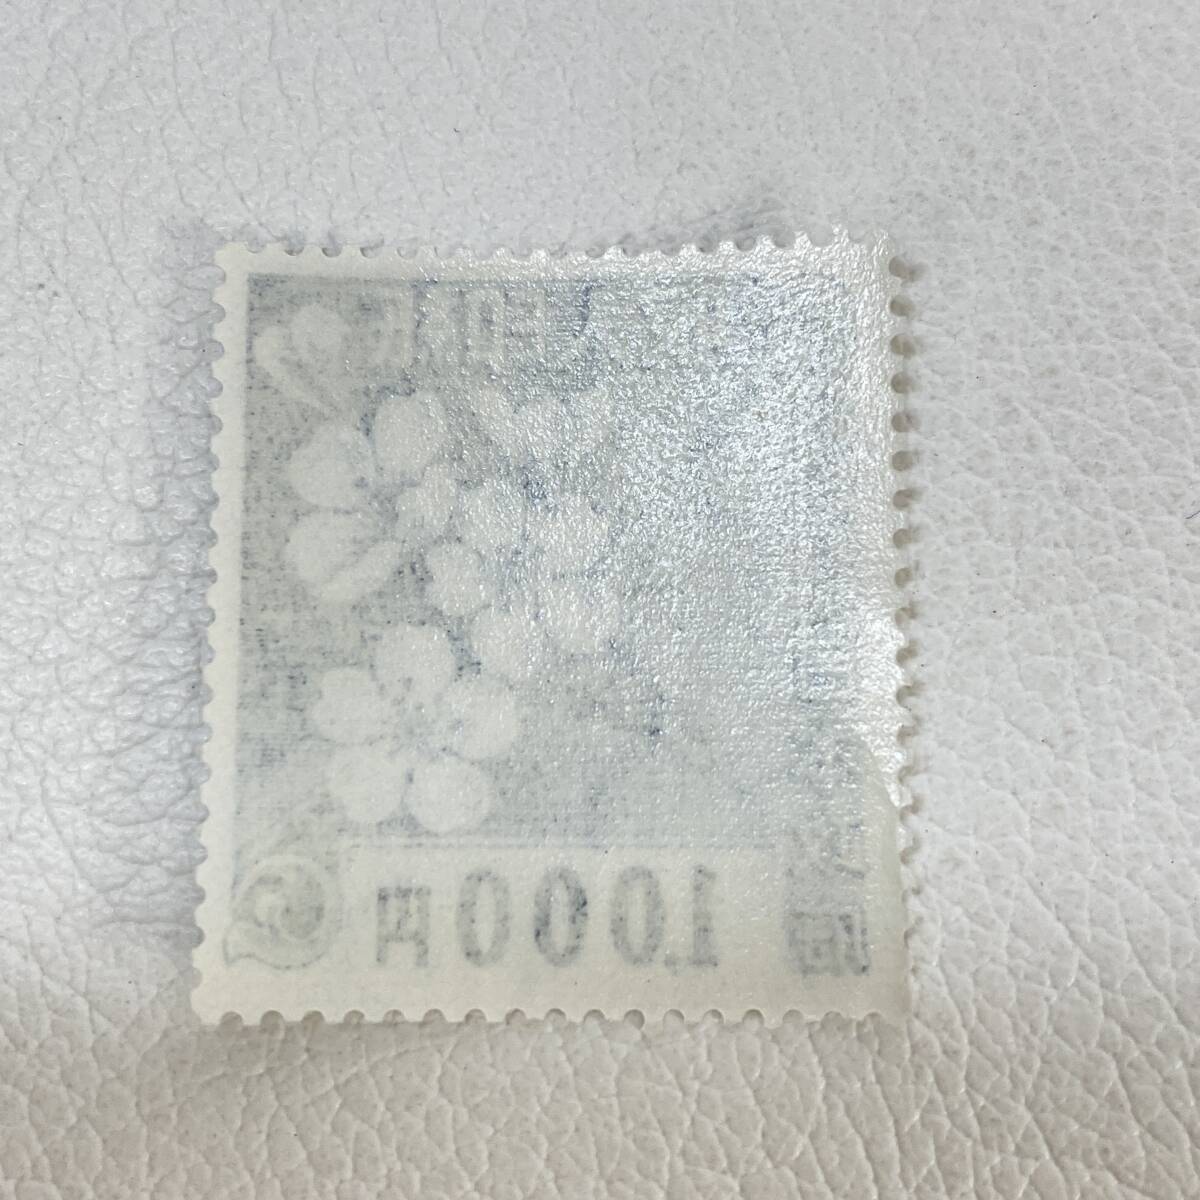 2404023-004 Japan . prefecture income seal paper unused old pattern 2000 jpy ×4 sheets /1000 jpy ×1 sheets total 9000 jpy minute reverse side glue have 